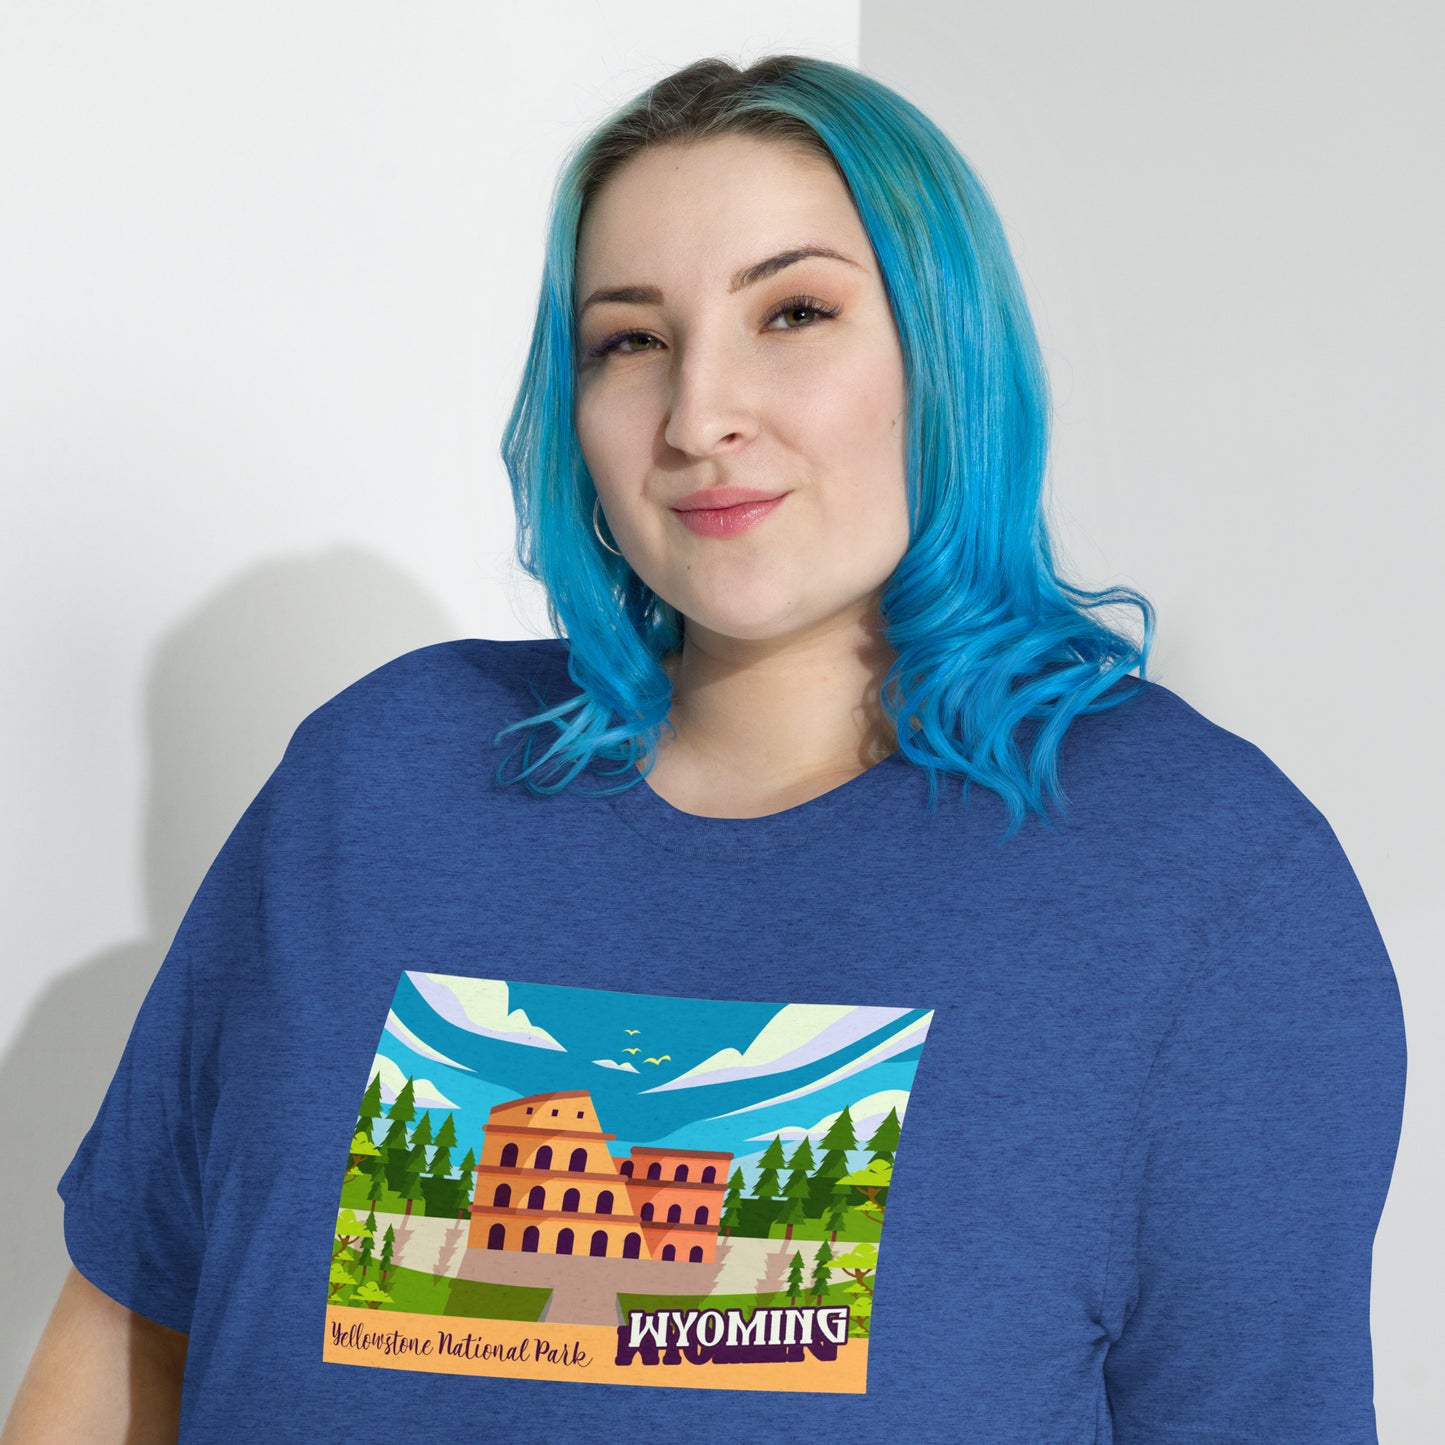 Premium Everyday Yellowstone "Paying Attention?" Tee